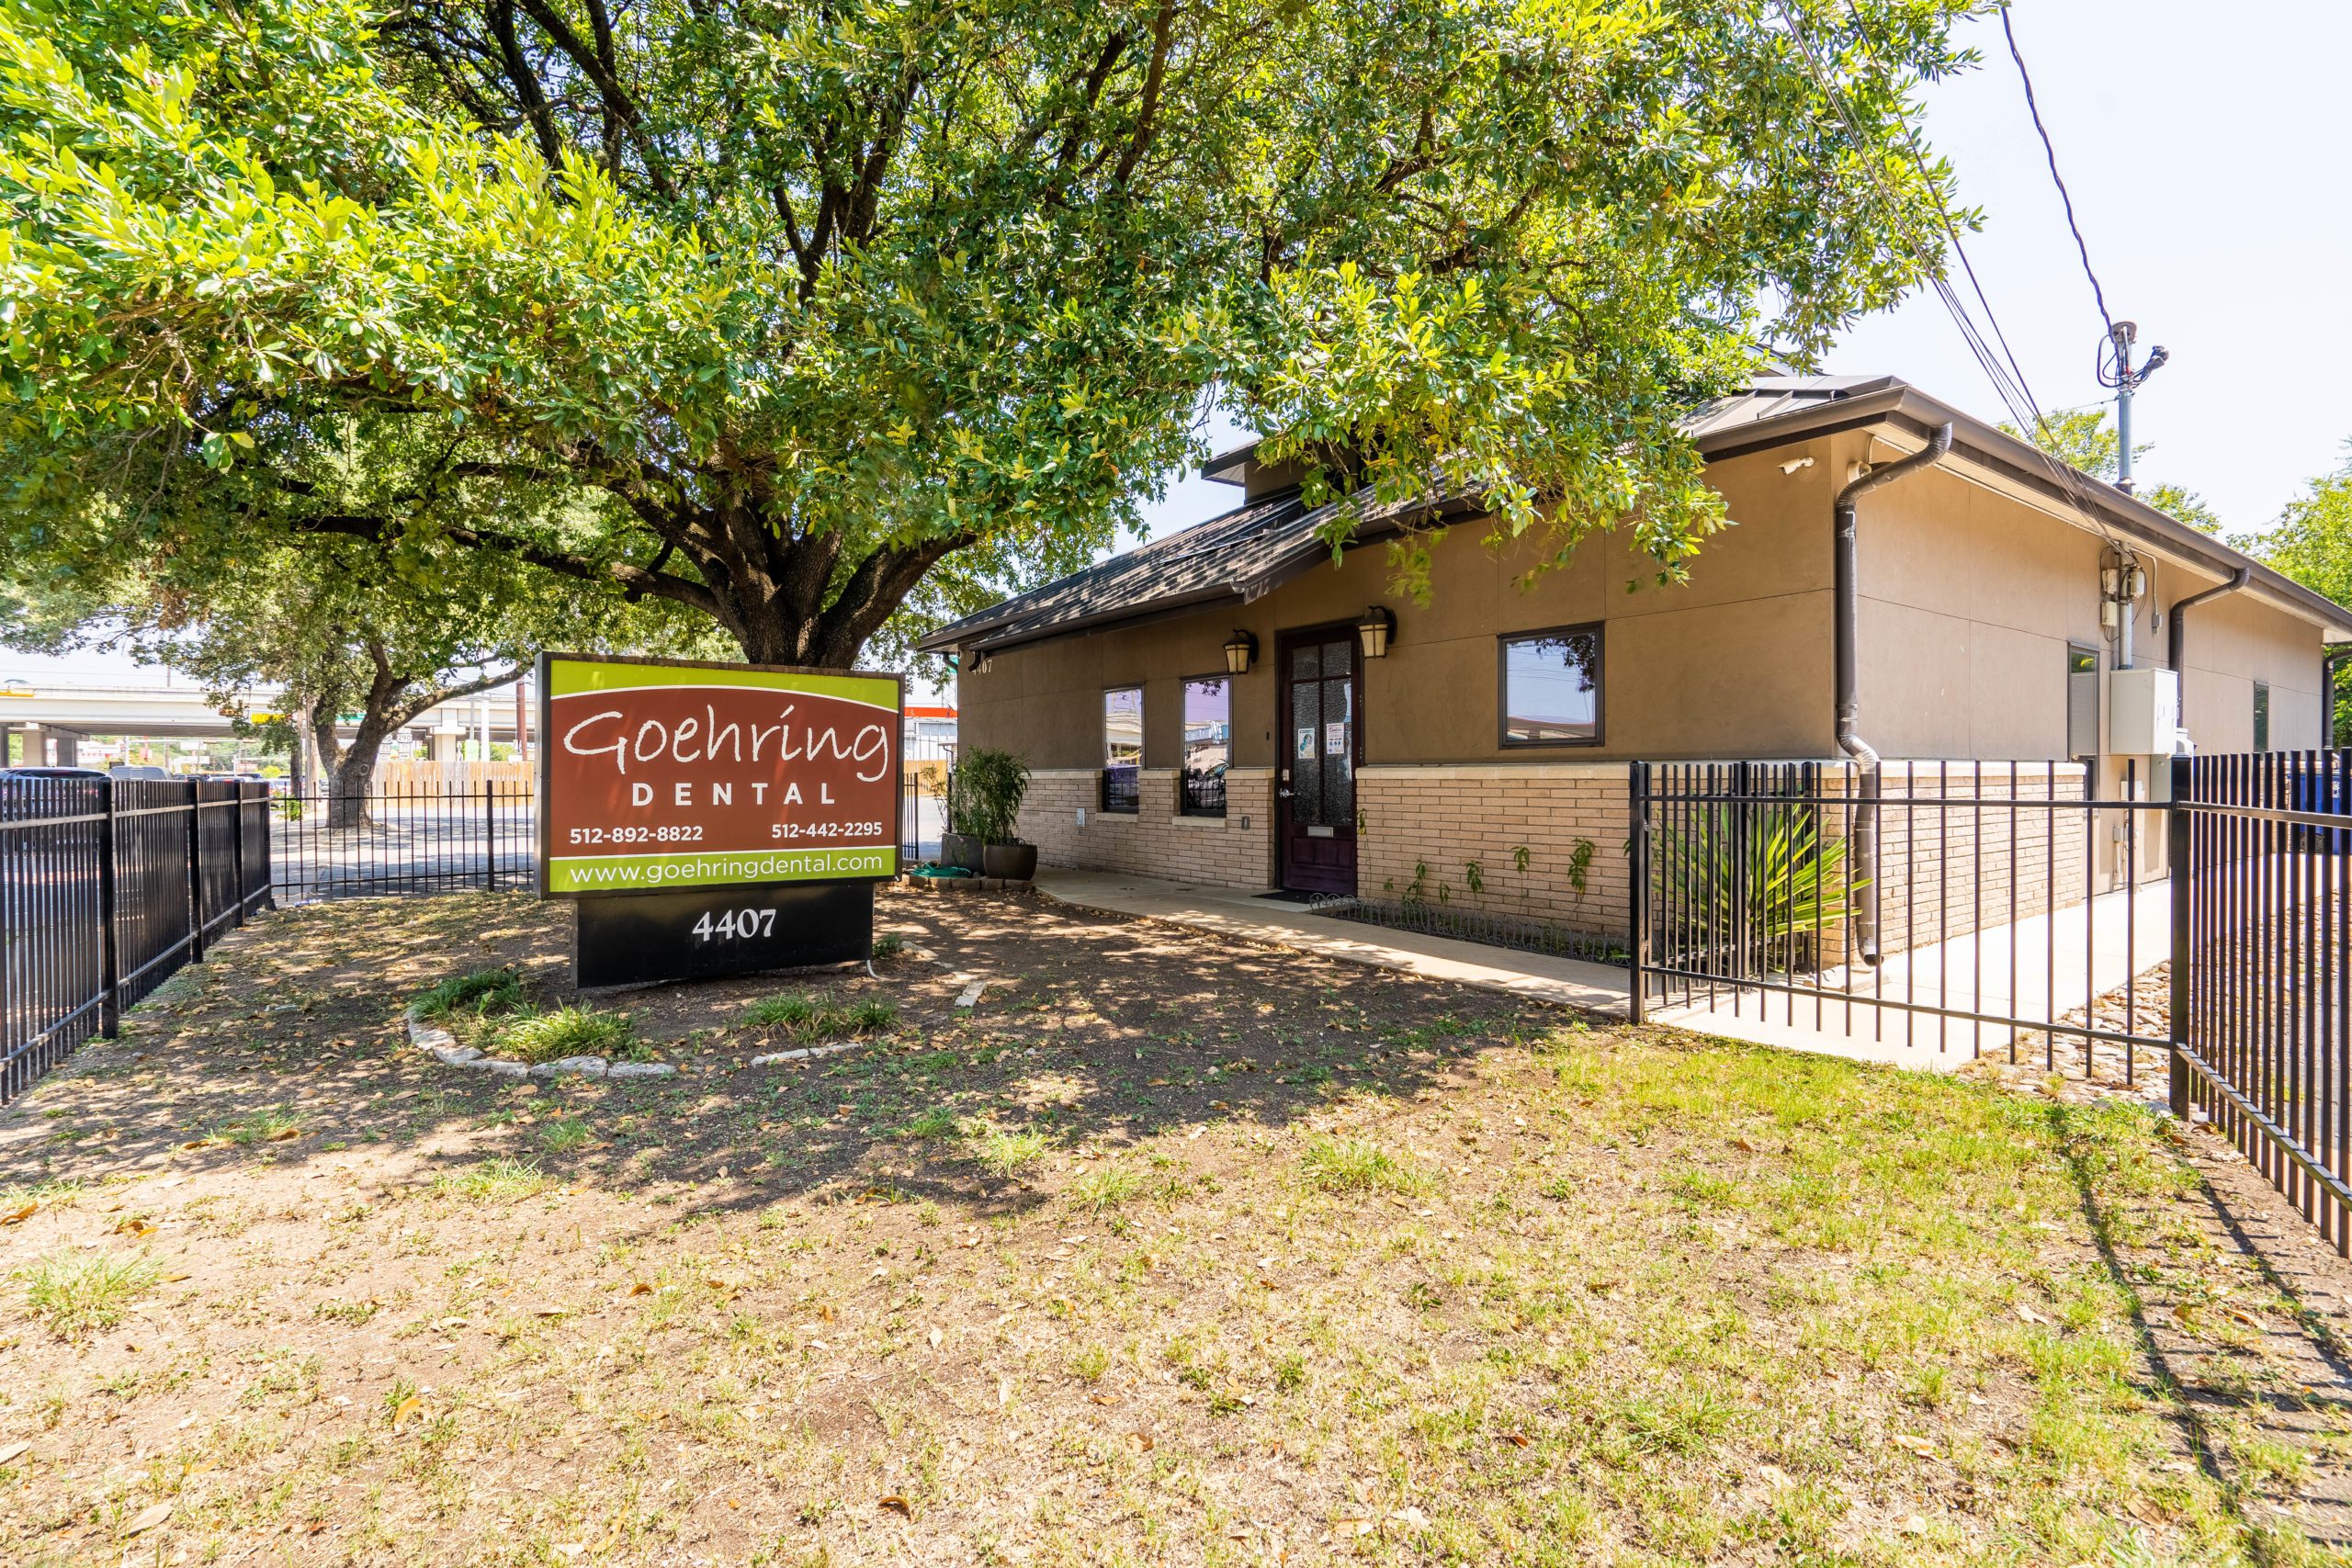 Exterior Photograph of Goehring Dental in Austin, Texas